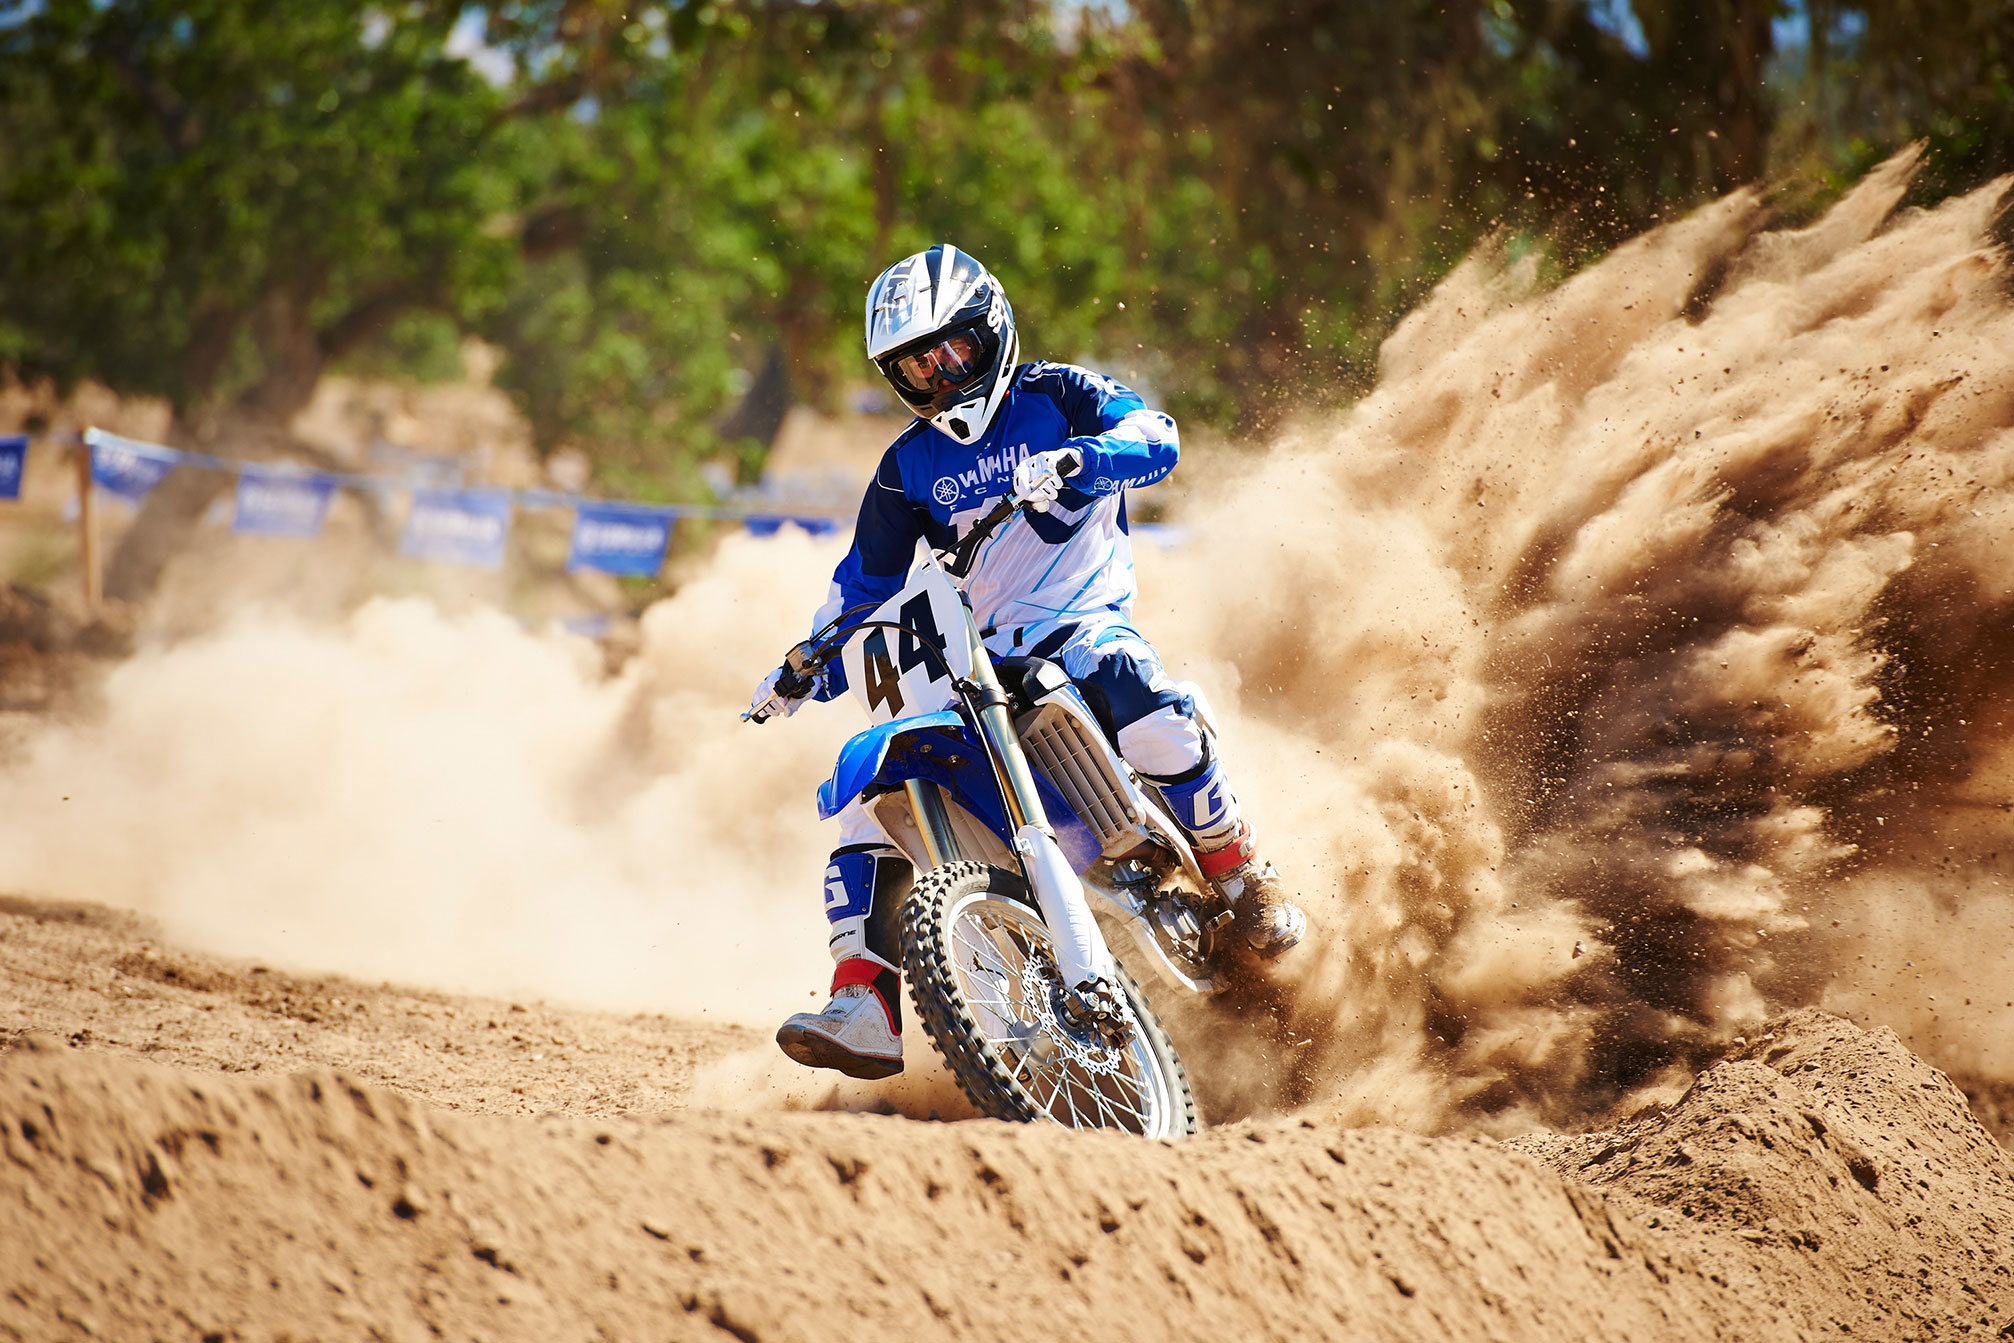 Free download Yamaha Dirt Bike Wallpaper For PC Wallpaper size 2014x1343 [2014x1343] for your Desktop, Mobile & Tablet. Explore Yamaha Dirt Bike Wallpaper. Dirt Bike Wallpaper, Motocross Wallpaper Dirt